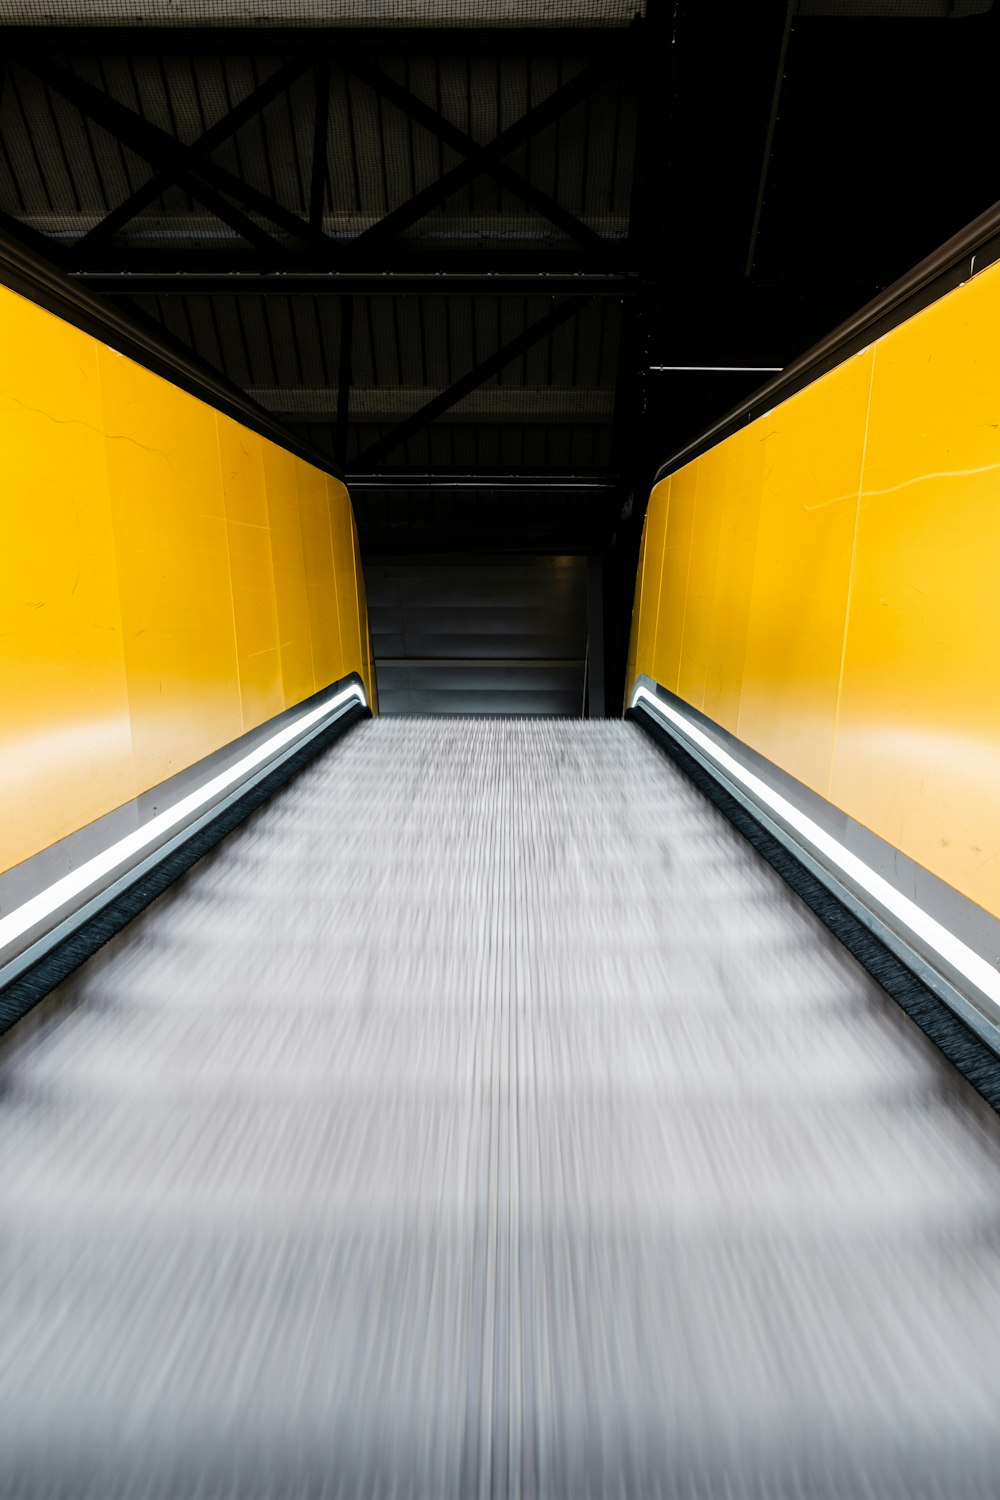 moving escalator with yellow handrails